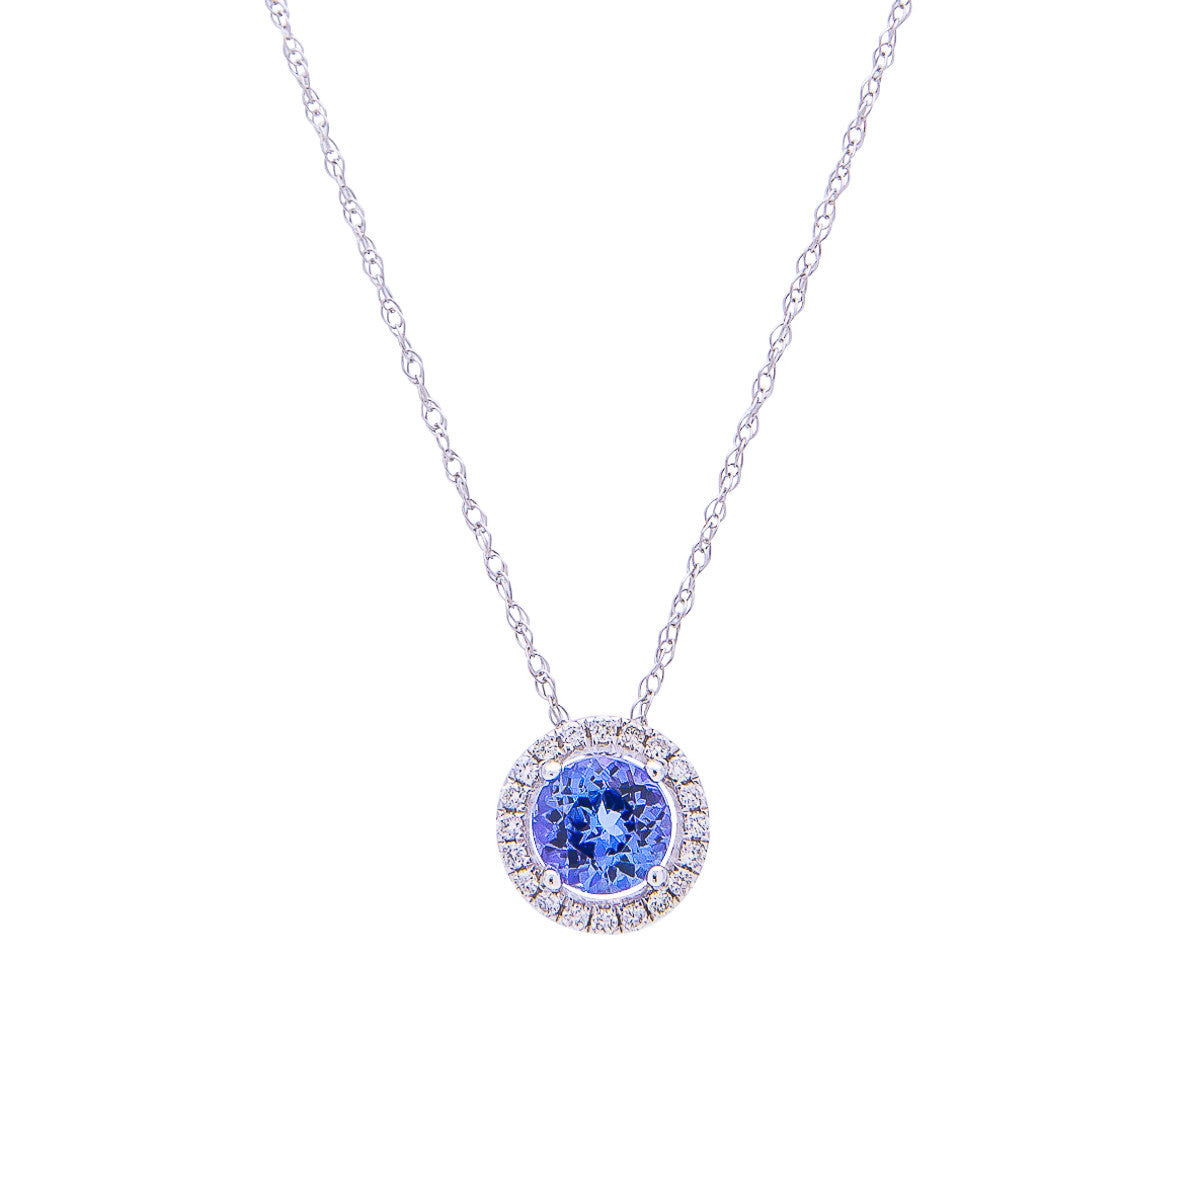 Sabel Collection 14K White Gold Round Tanzanite and Diamond Halo Pendant Necklace